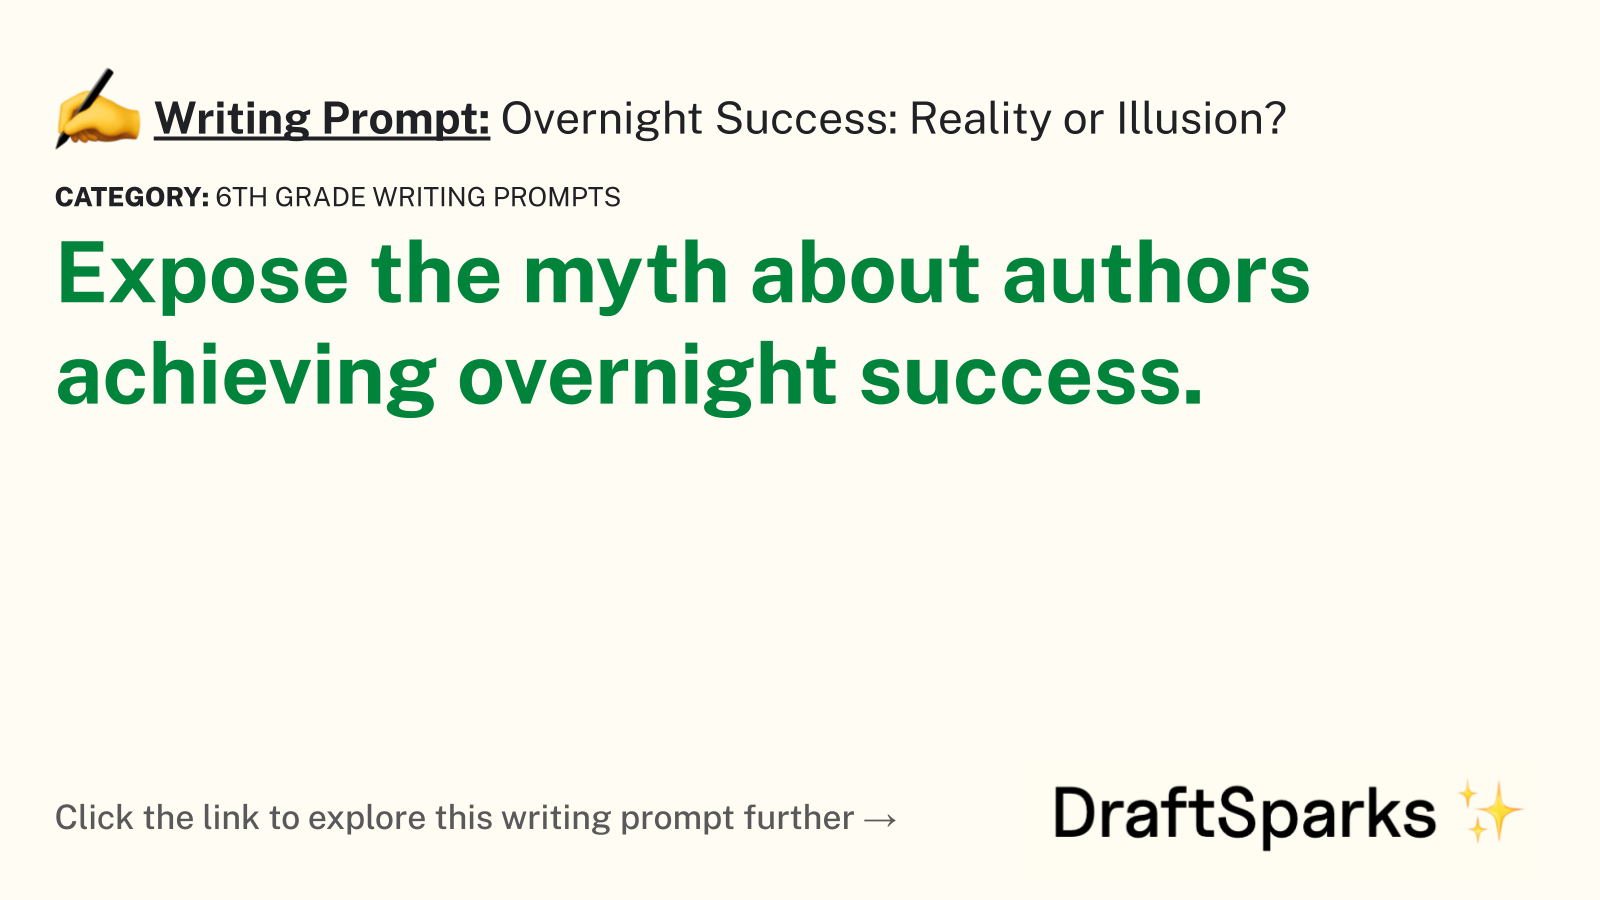 Overnight Success: Reality or Illusion?